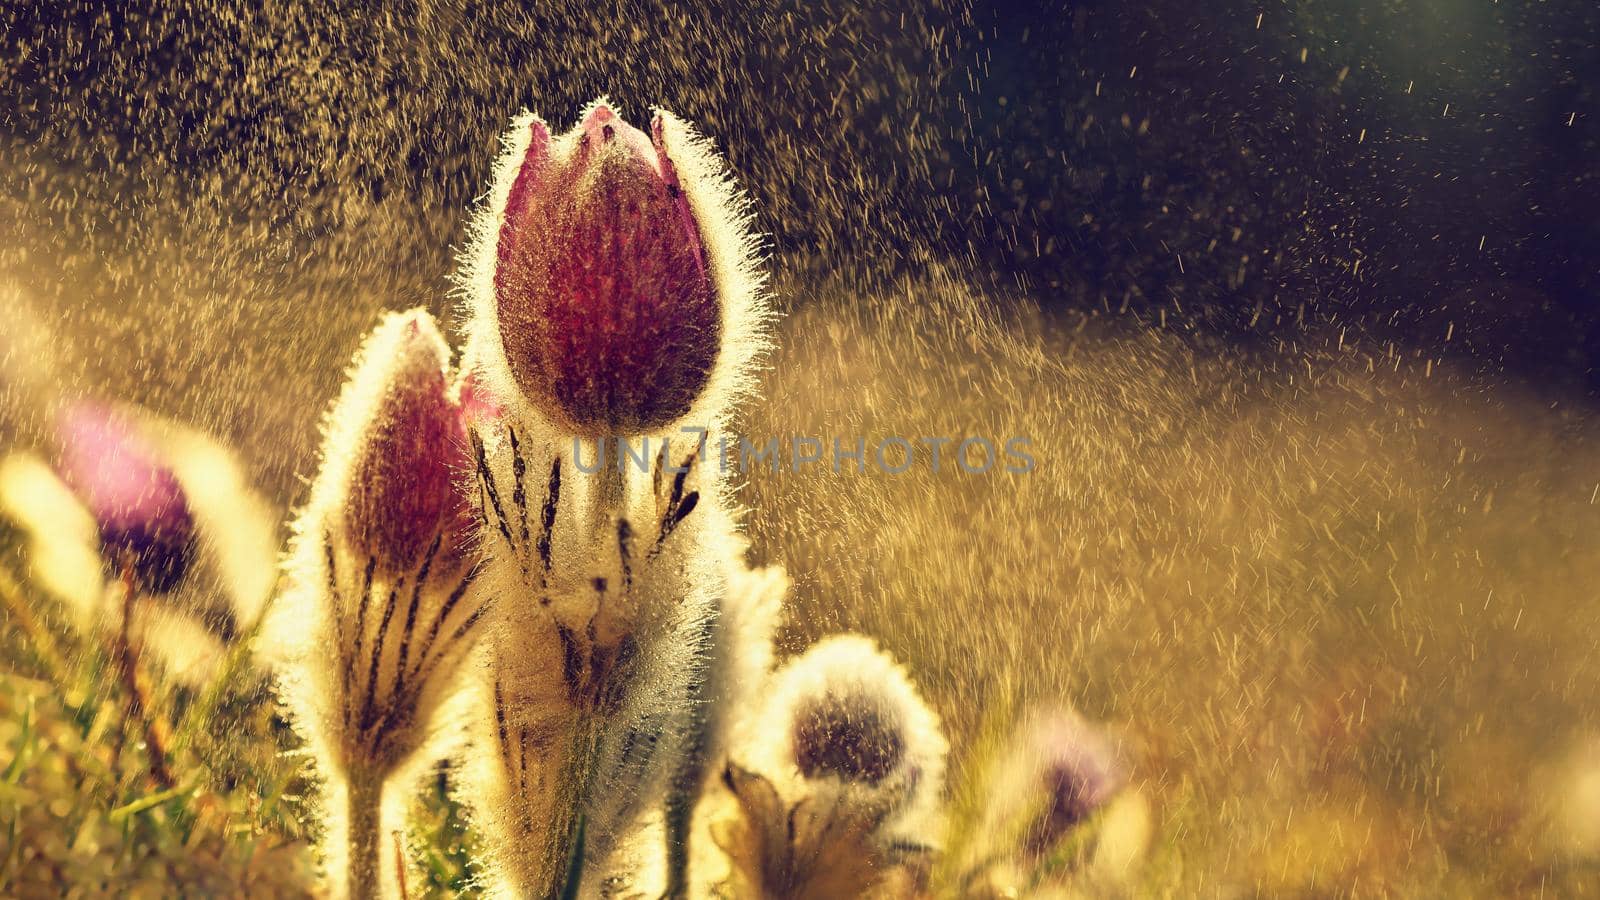 Spring flowers. Beautifully blossoming pasque flower and sun with a natural colored background. (Pulsatilla grandis) by Montypeter